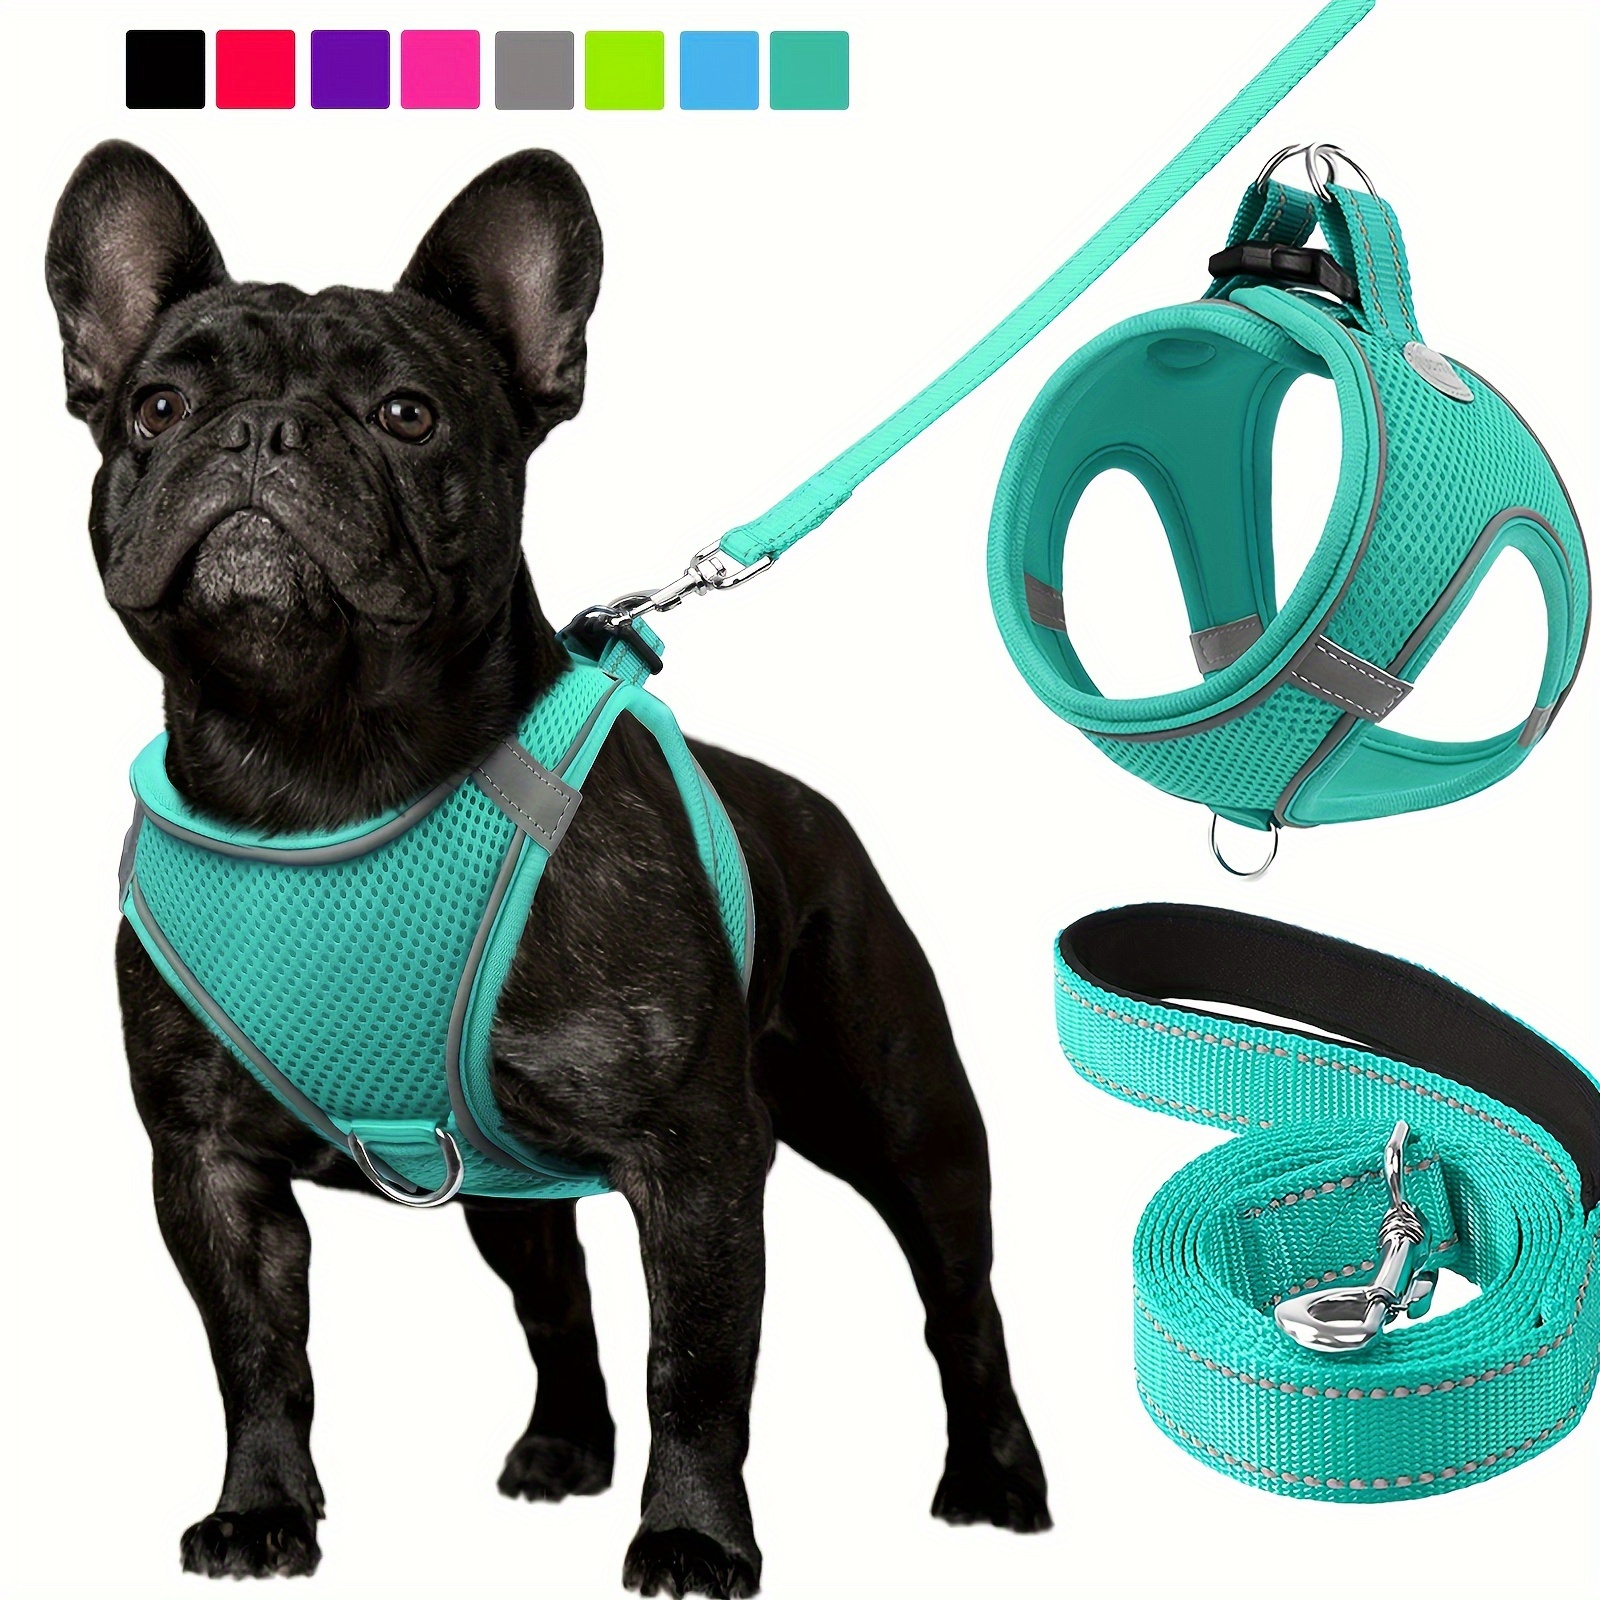 

Joytale Reflective Step-in Dog Harness And Leash Set - Soft Padded Nylon Leash And Breathable Mesh Vest Harness For Small And Medium Dogs - Comfortable And Secure Walking Experience